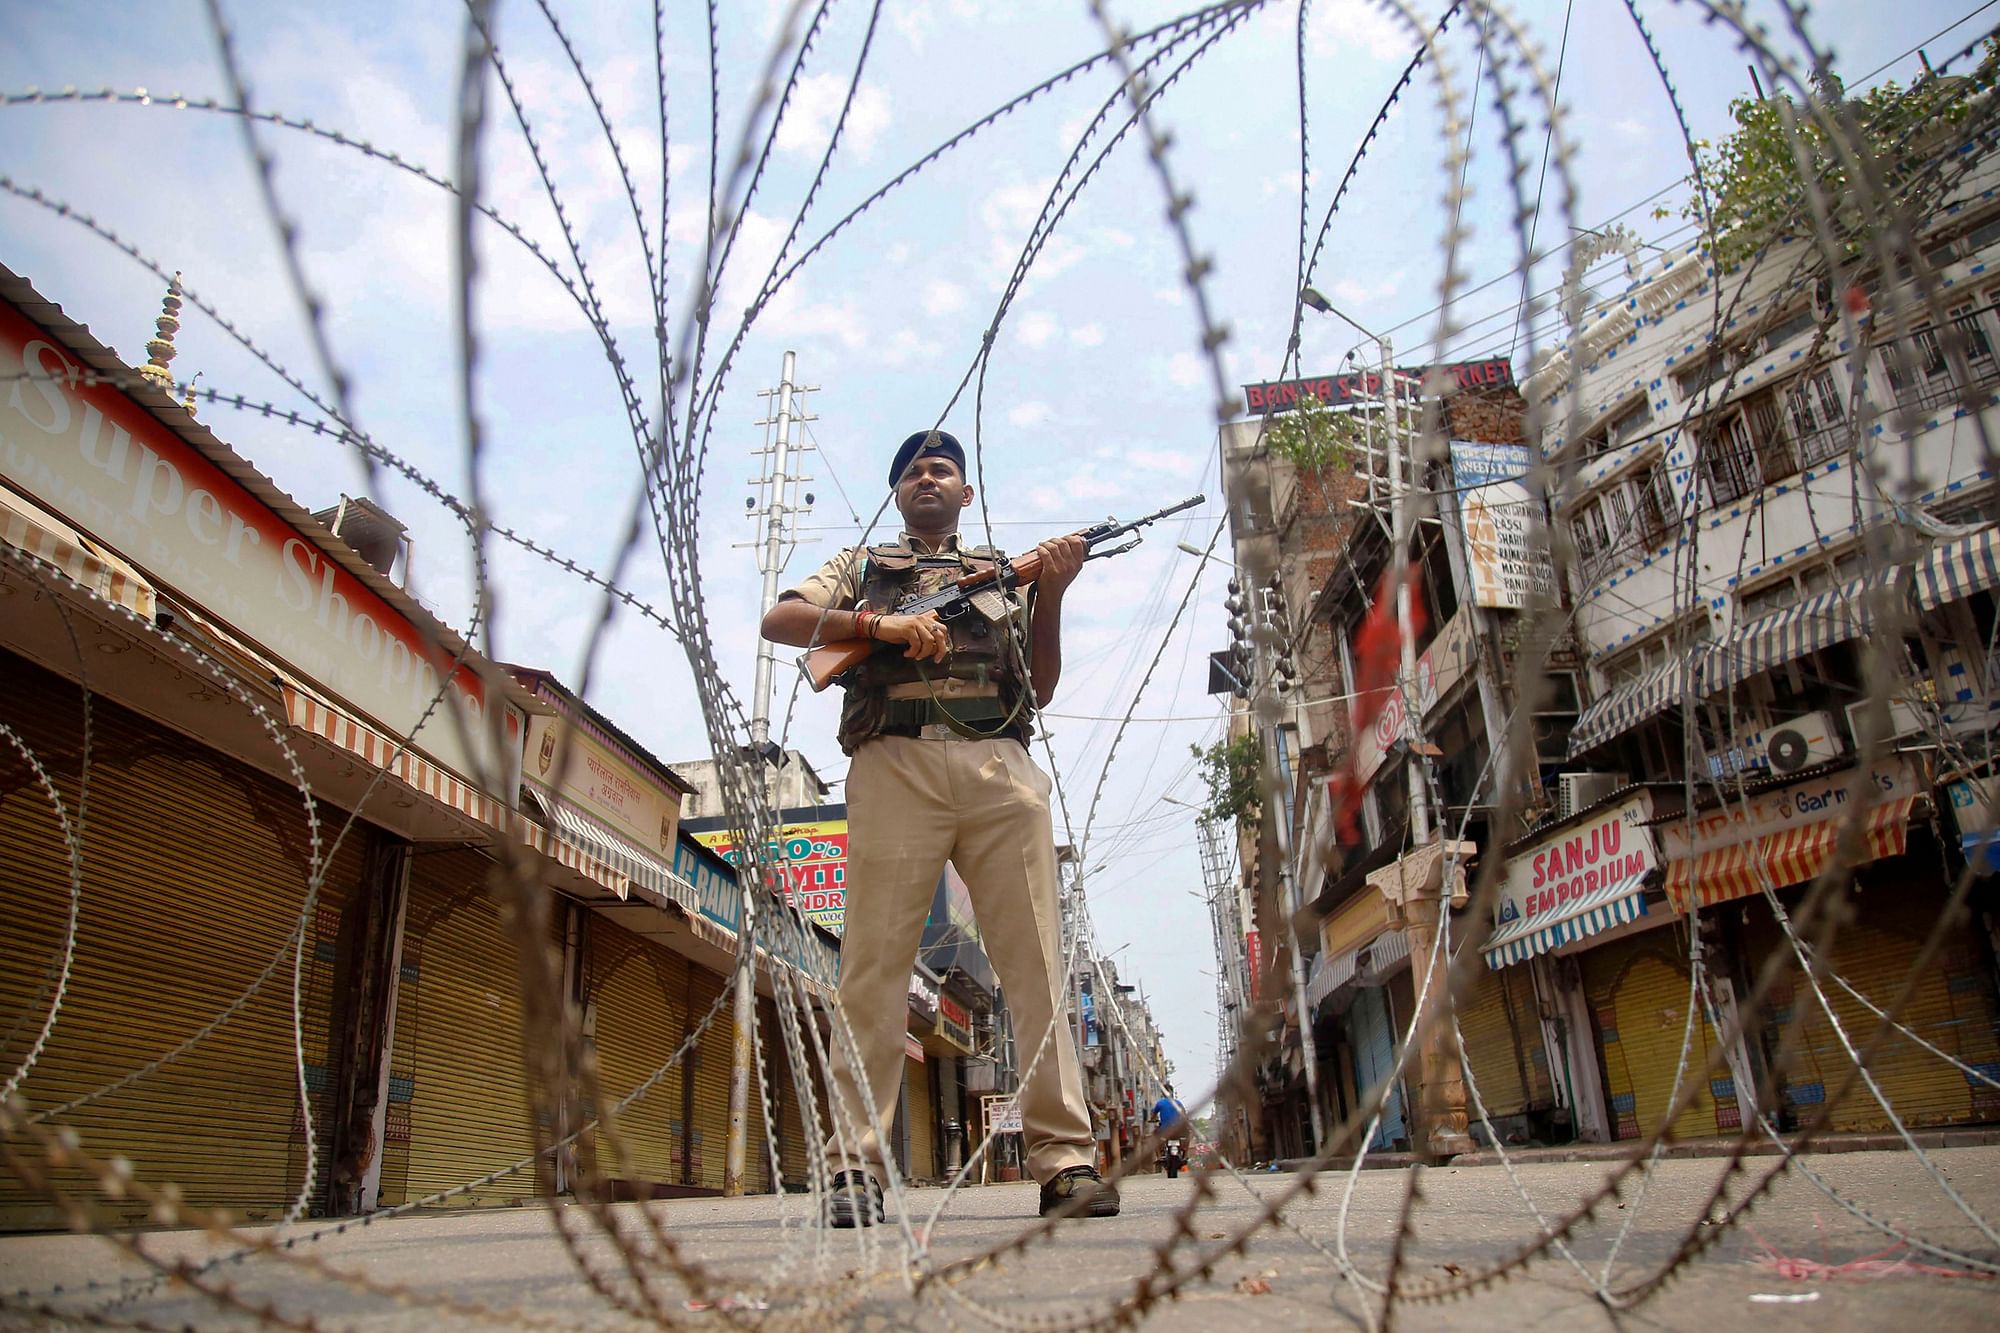 CRPF personnel stand guard during restrictions at Raghunath Bazar in Jammu. Image used for representational purposes.